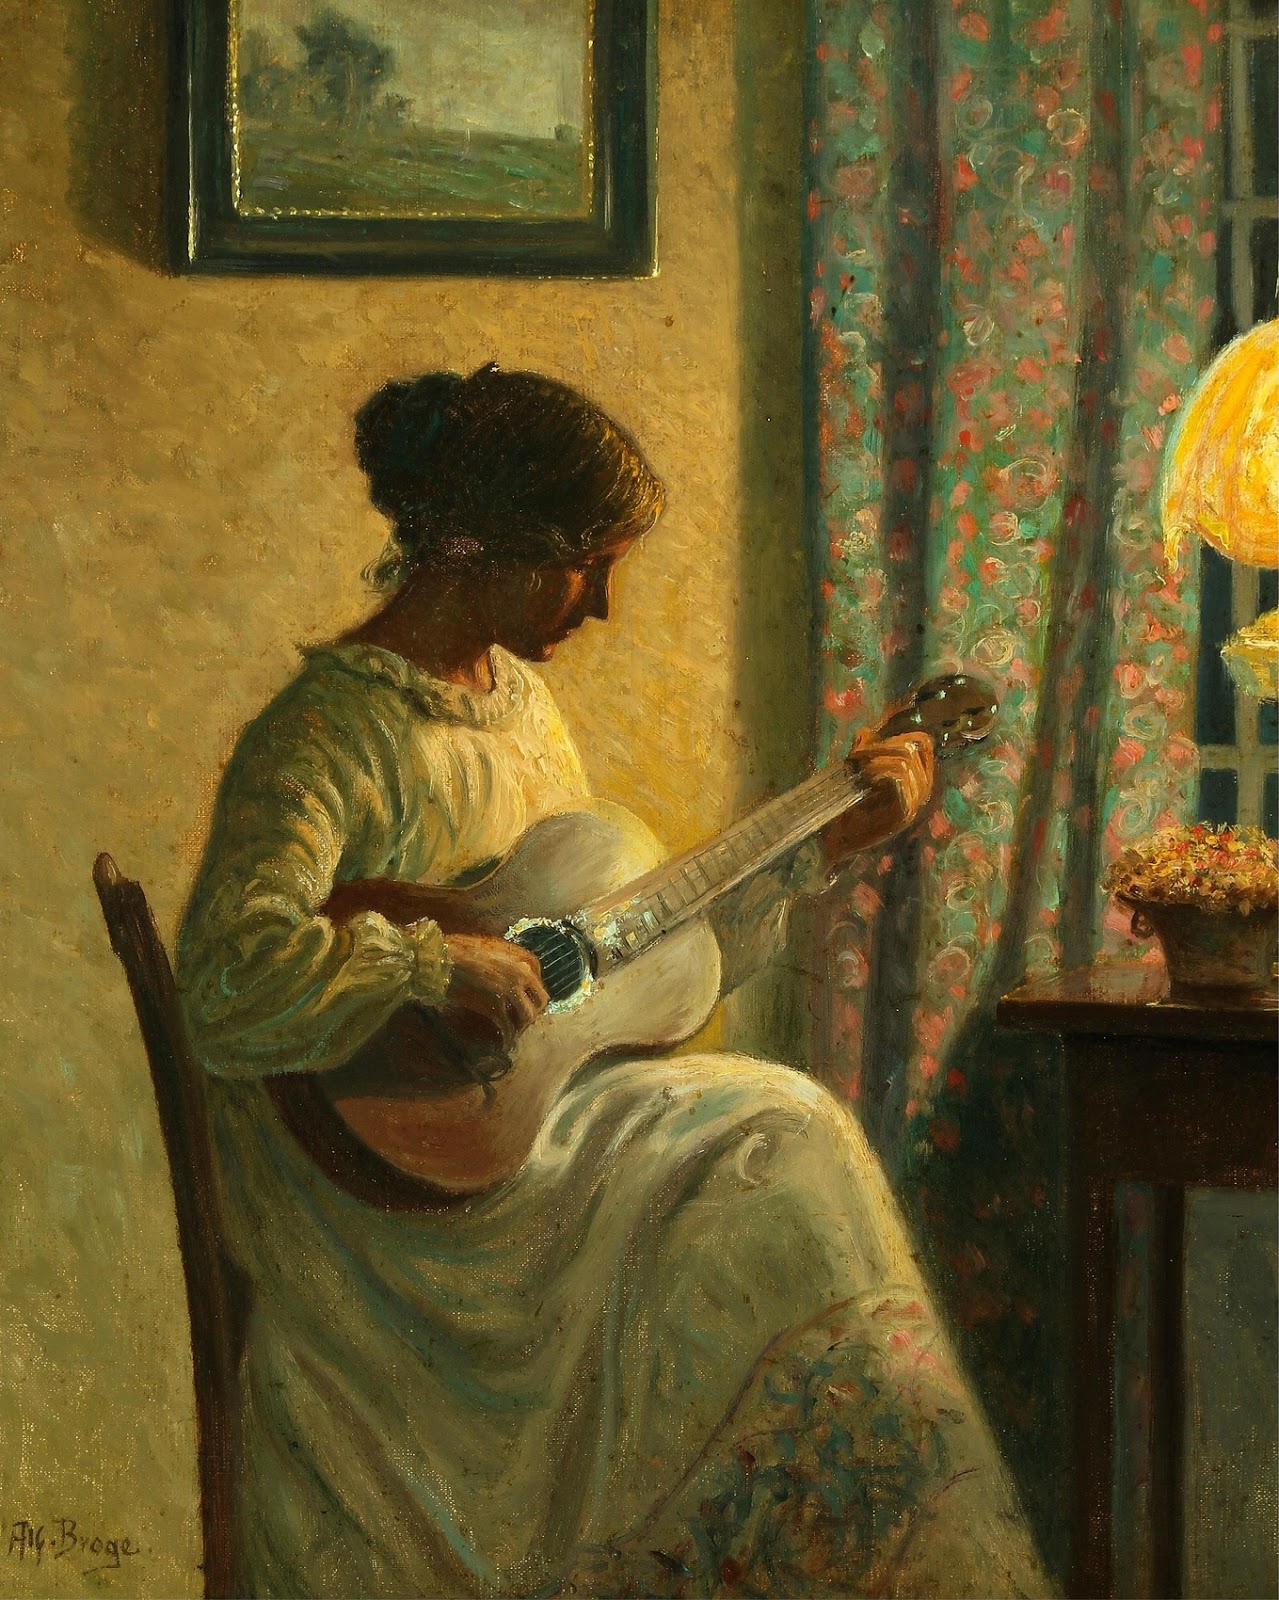   ,    (Interior with a woman playing guitar) 53  43 .,. 